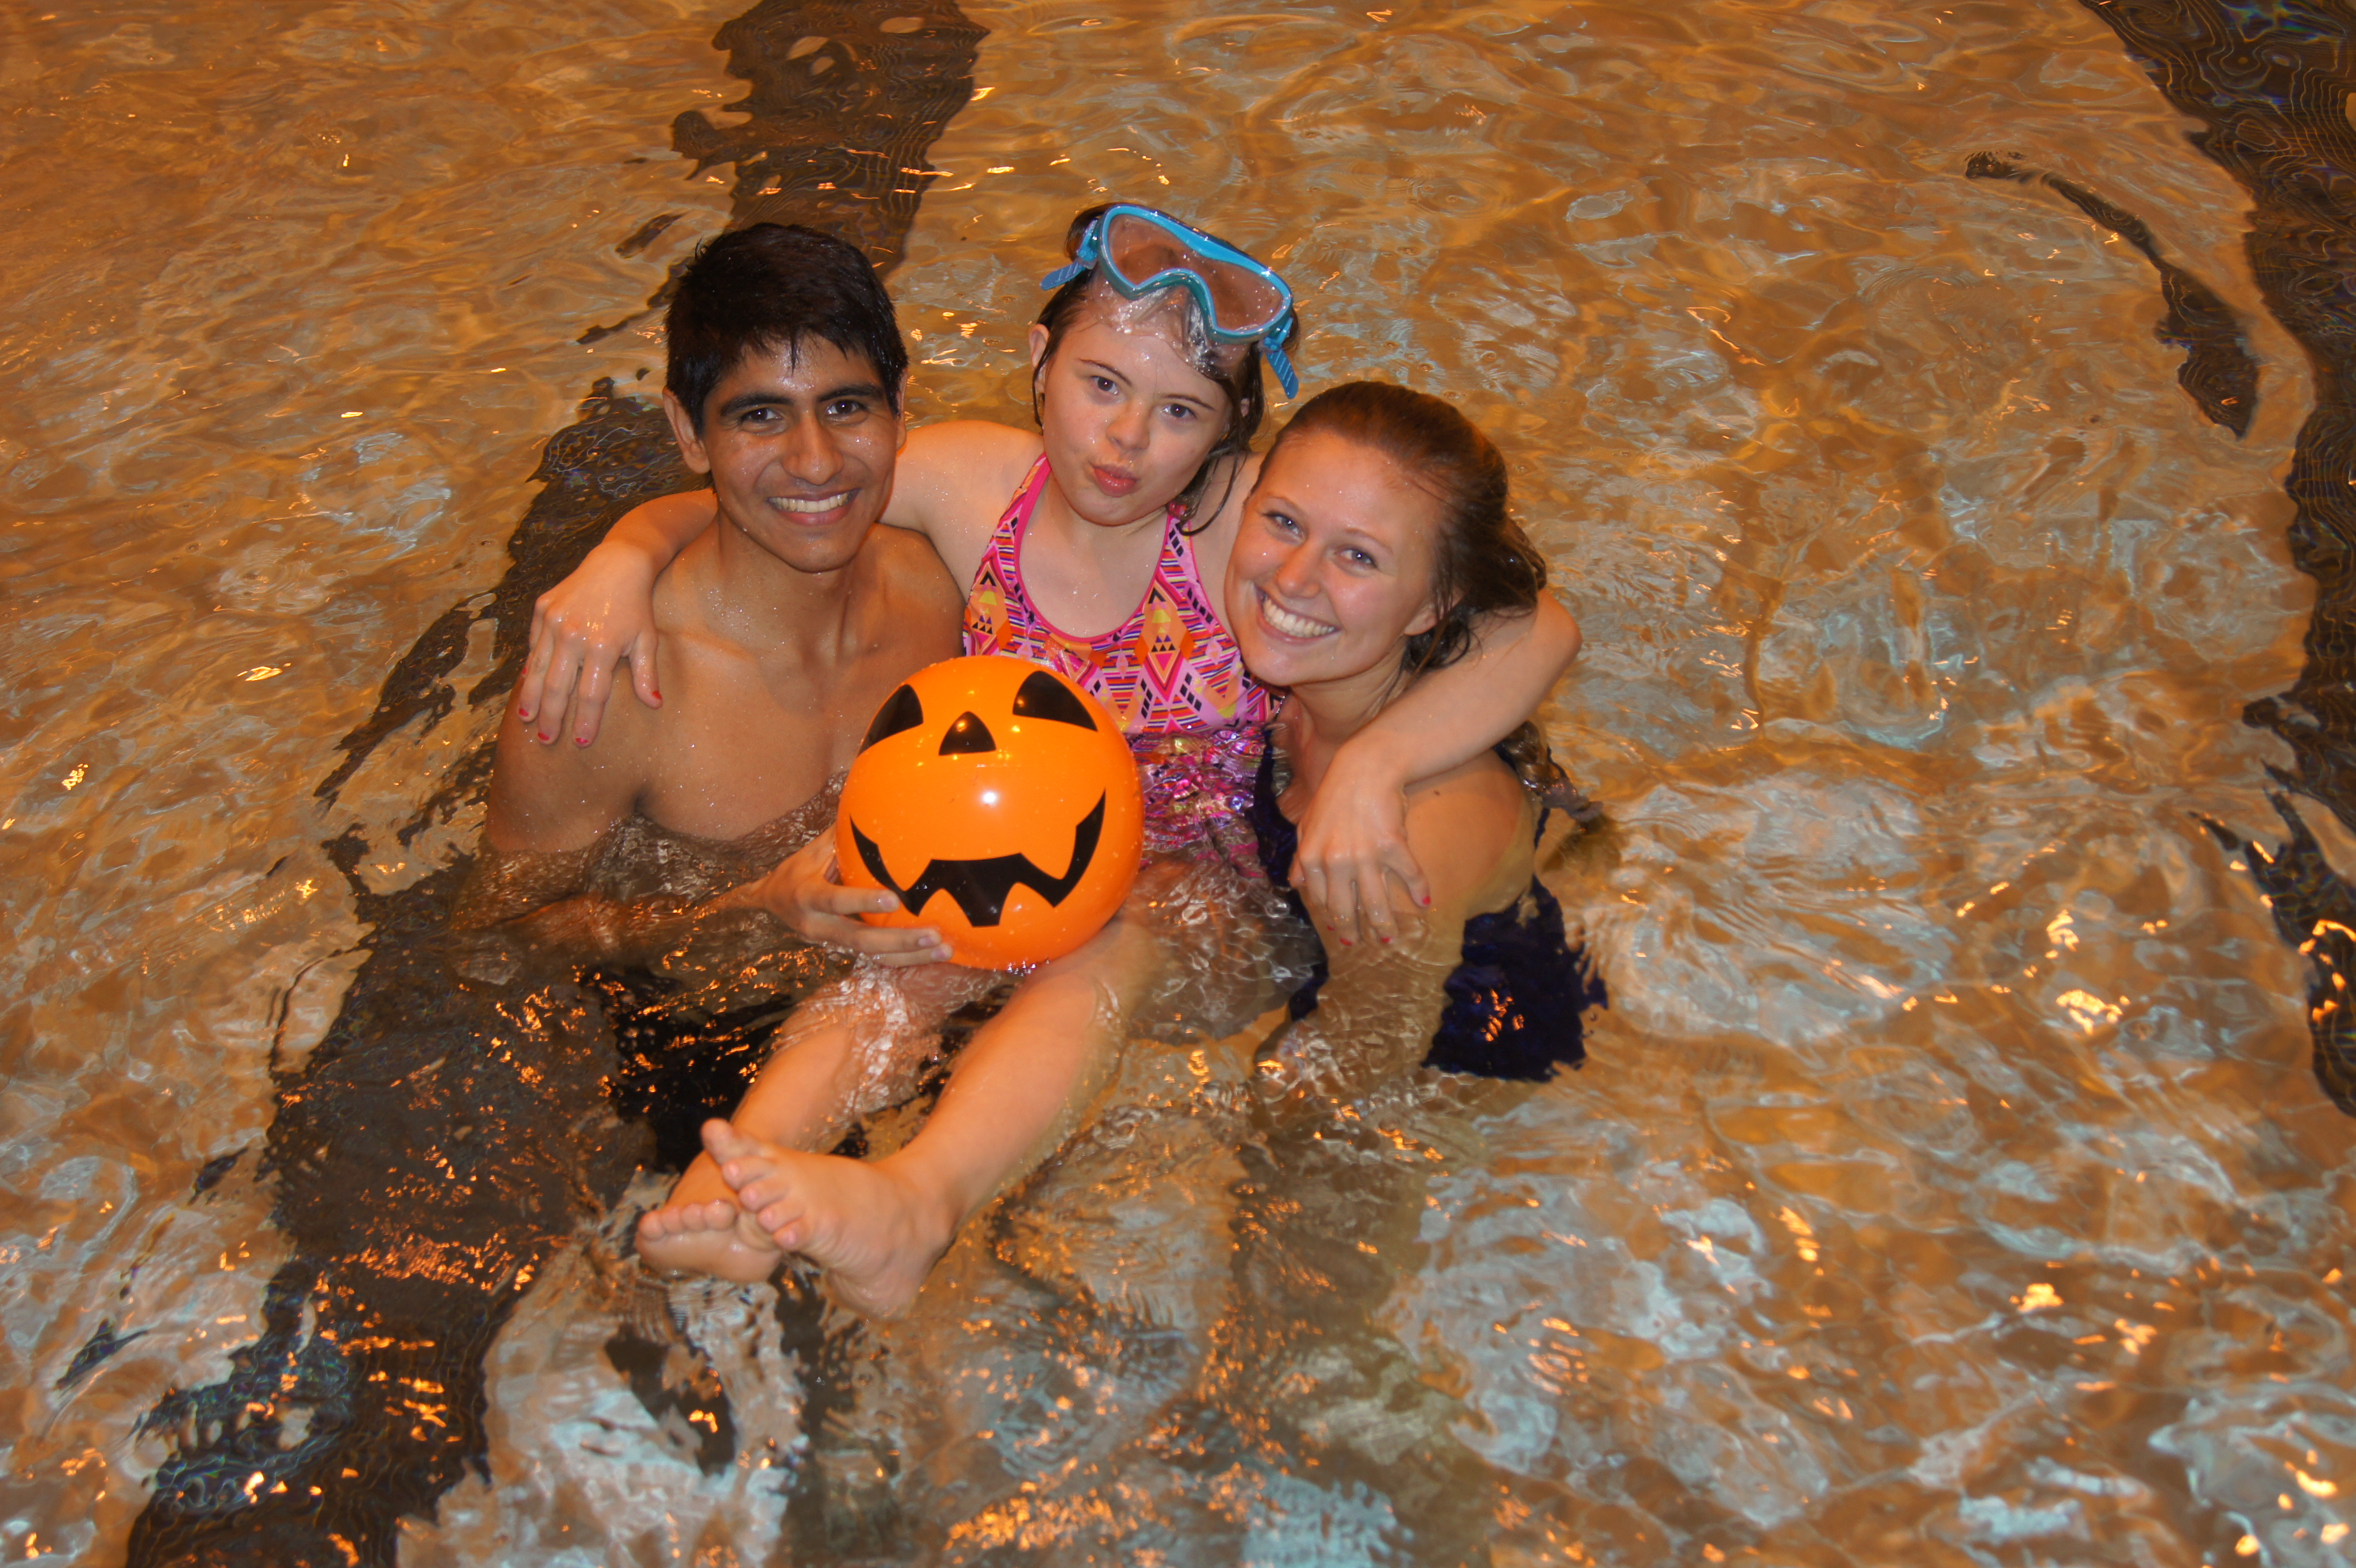 Two University Students play in the pool with a girl with a disability.